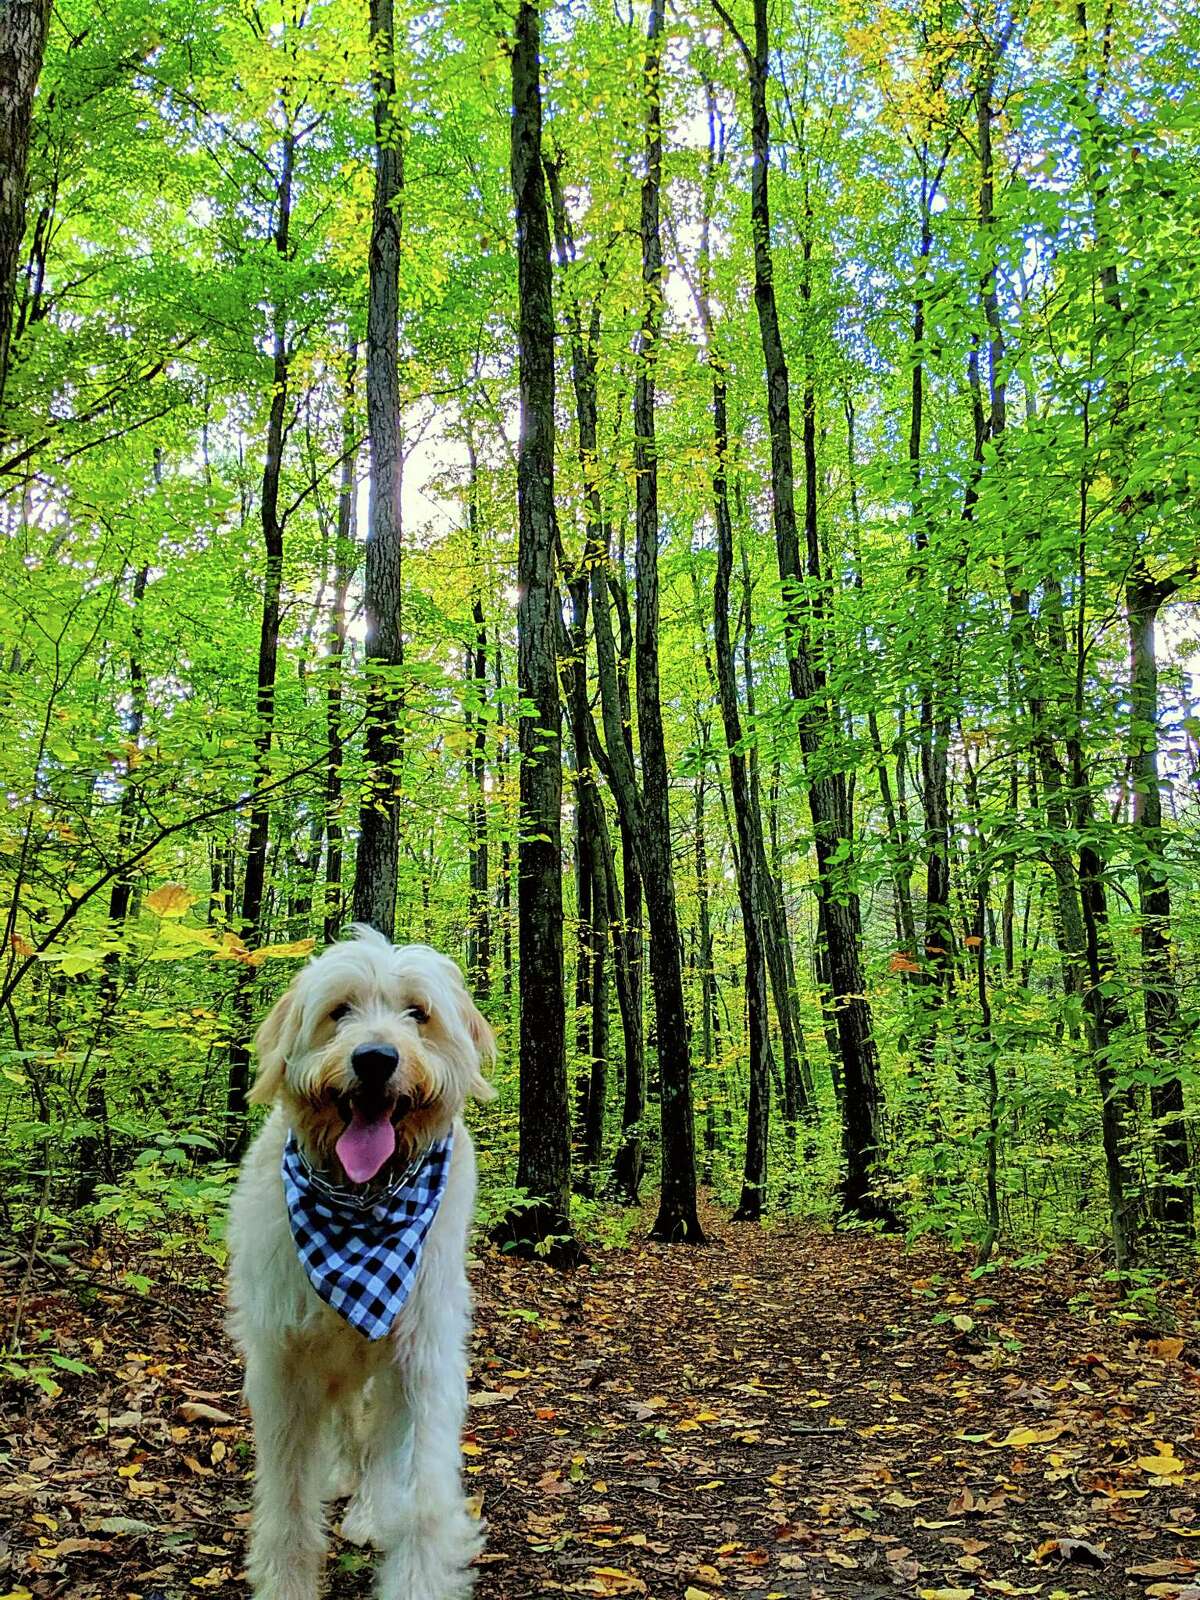 In September the Boswell family took a hike on the trails at Clifton Park's Kinns Road Park, a trip that included their one-year-old golden doodle Murphy and their daughter Chloe. (Robert Boswell Jr.)